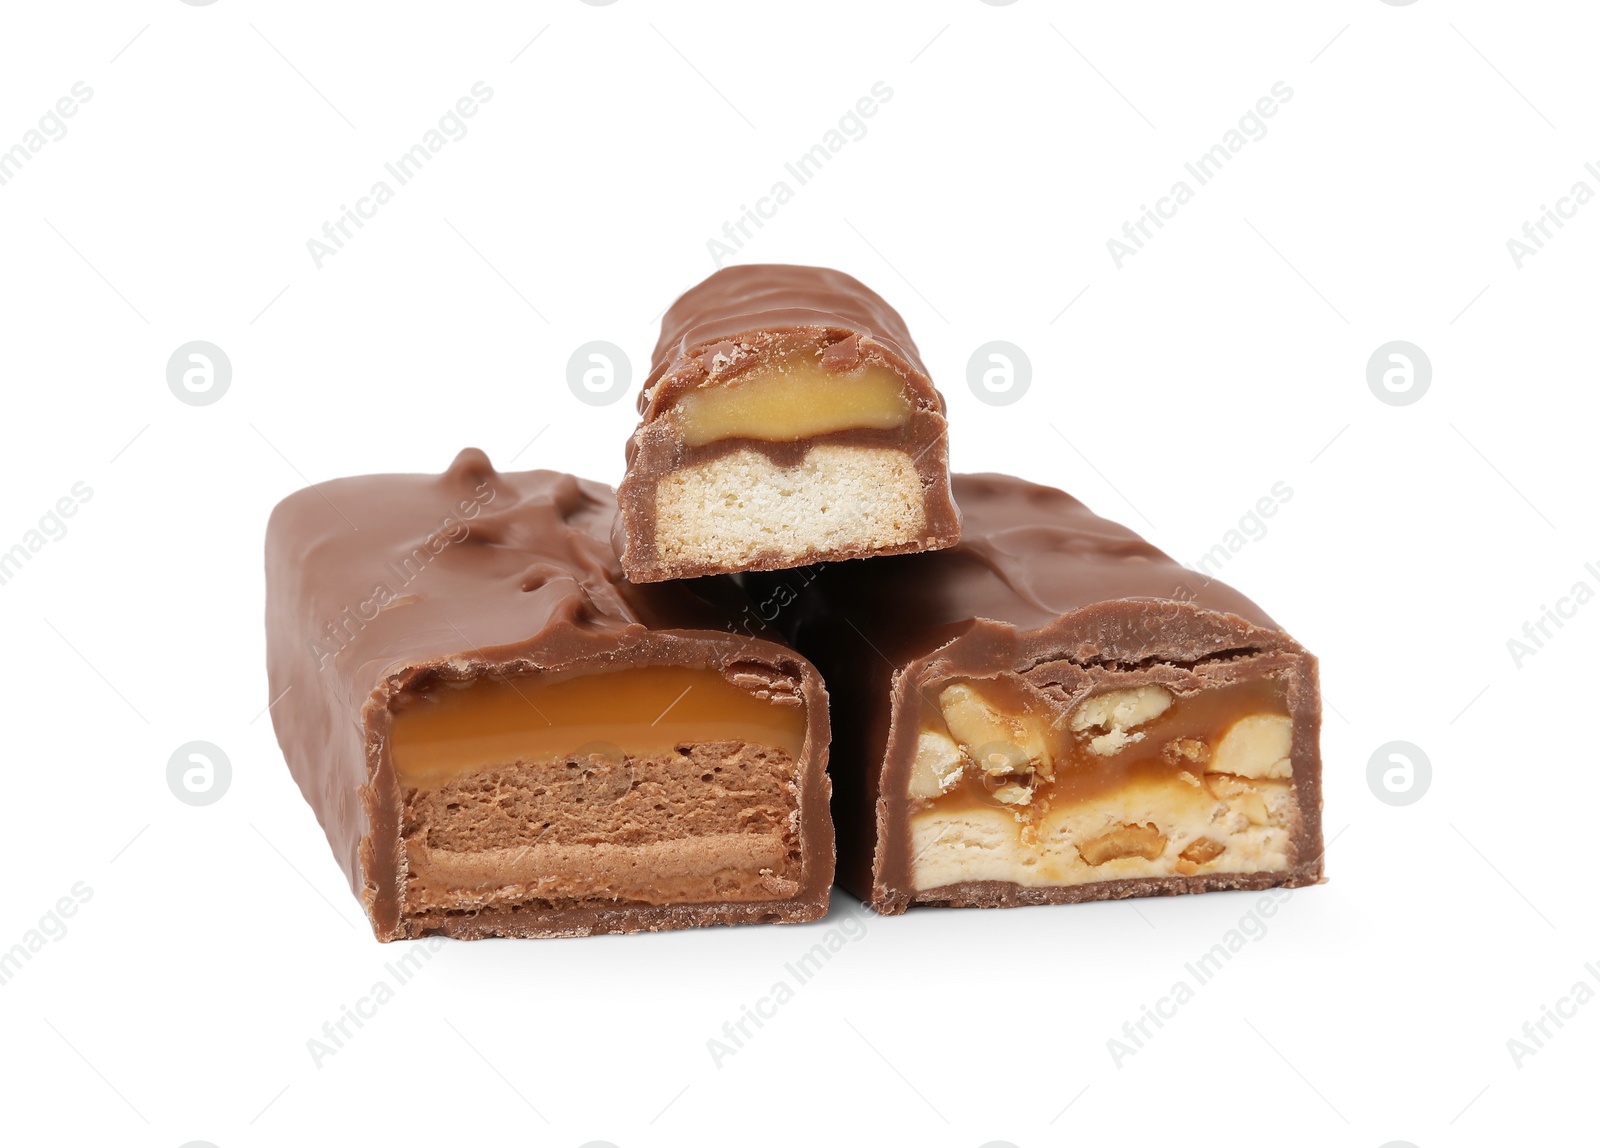 Photo of Pieces of different tasty chocolate bars on white background